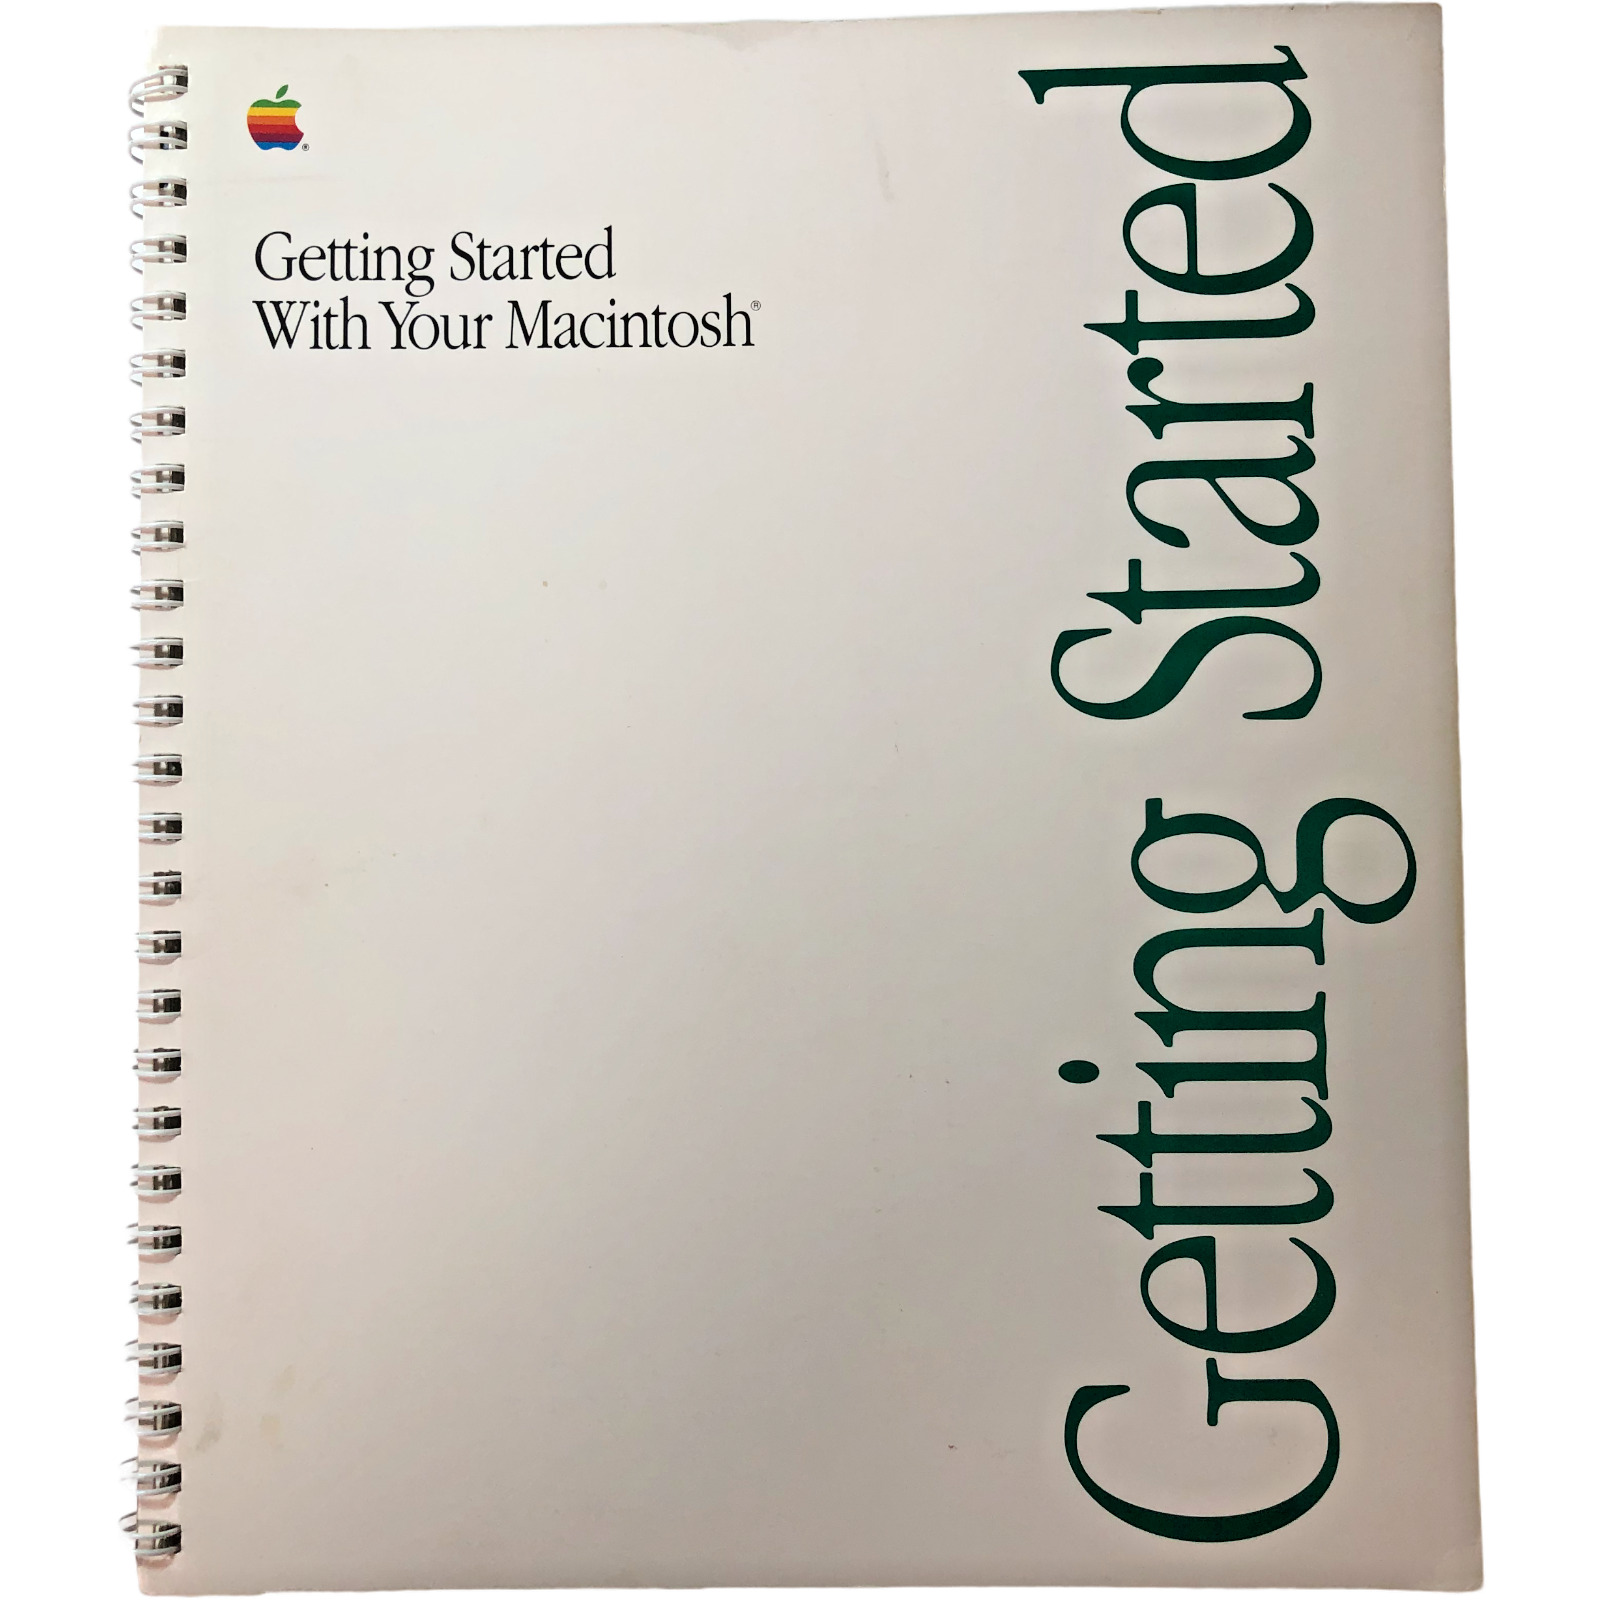 Vtg Apple Getting Started With Your Macintosh 030-4014-A 1990 Spiral Bound Retro